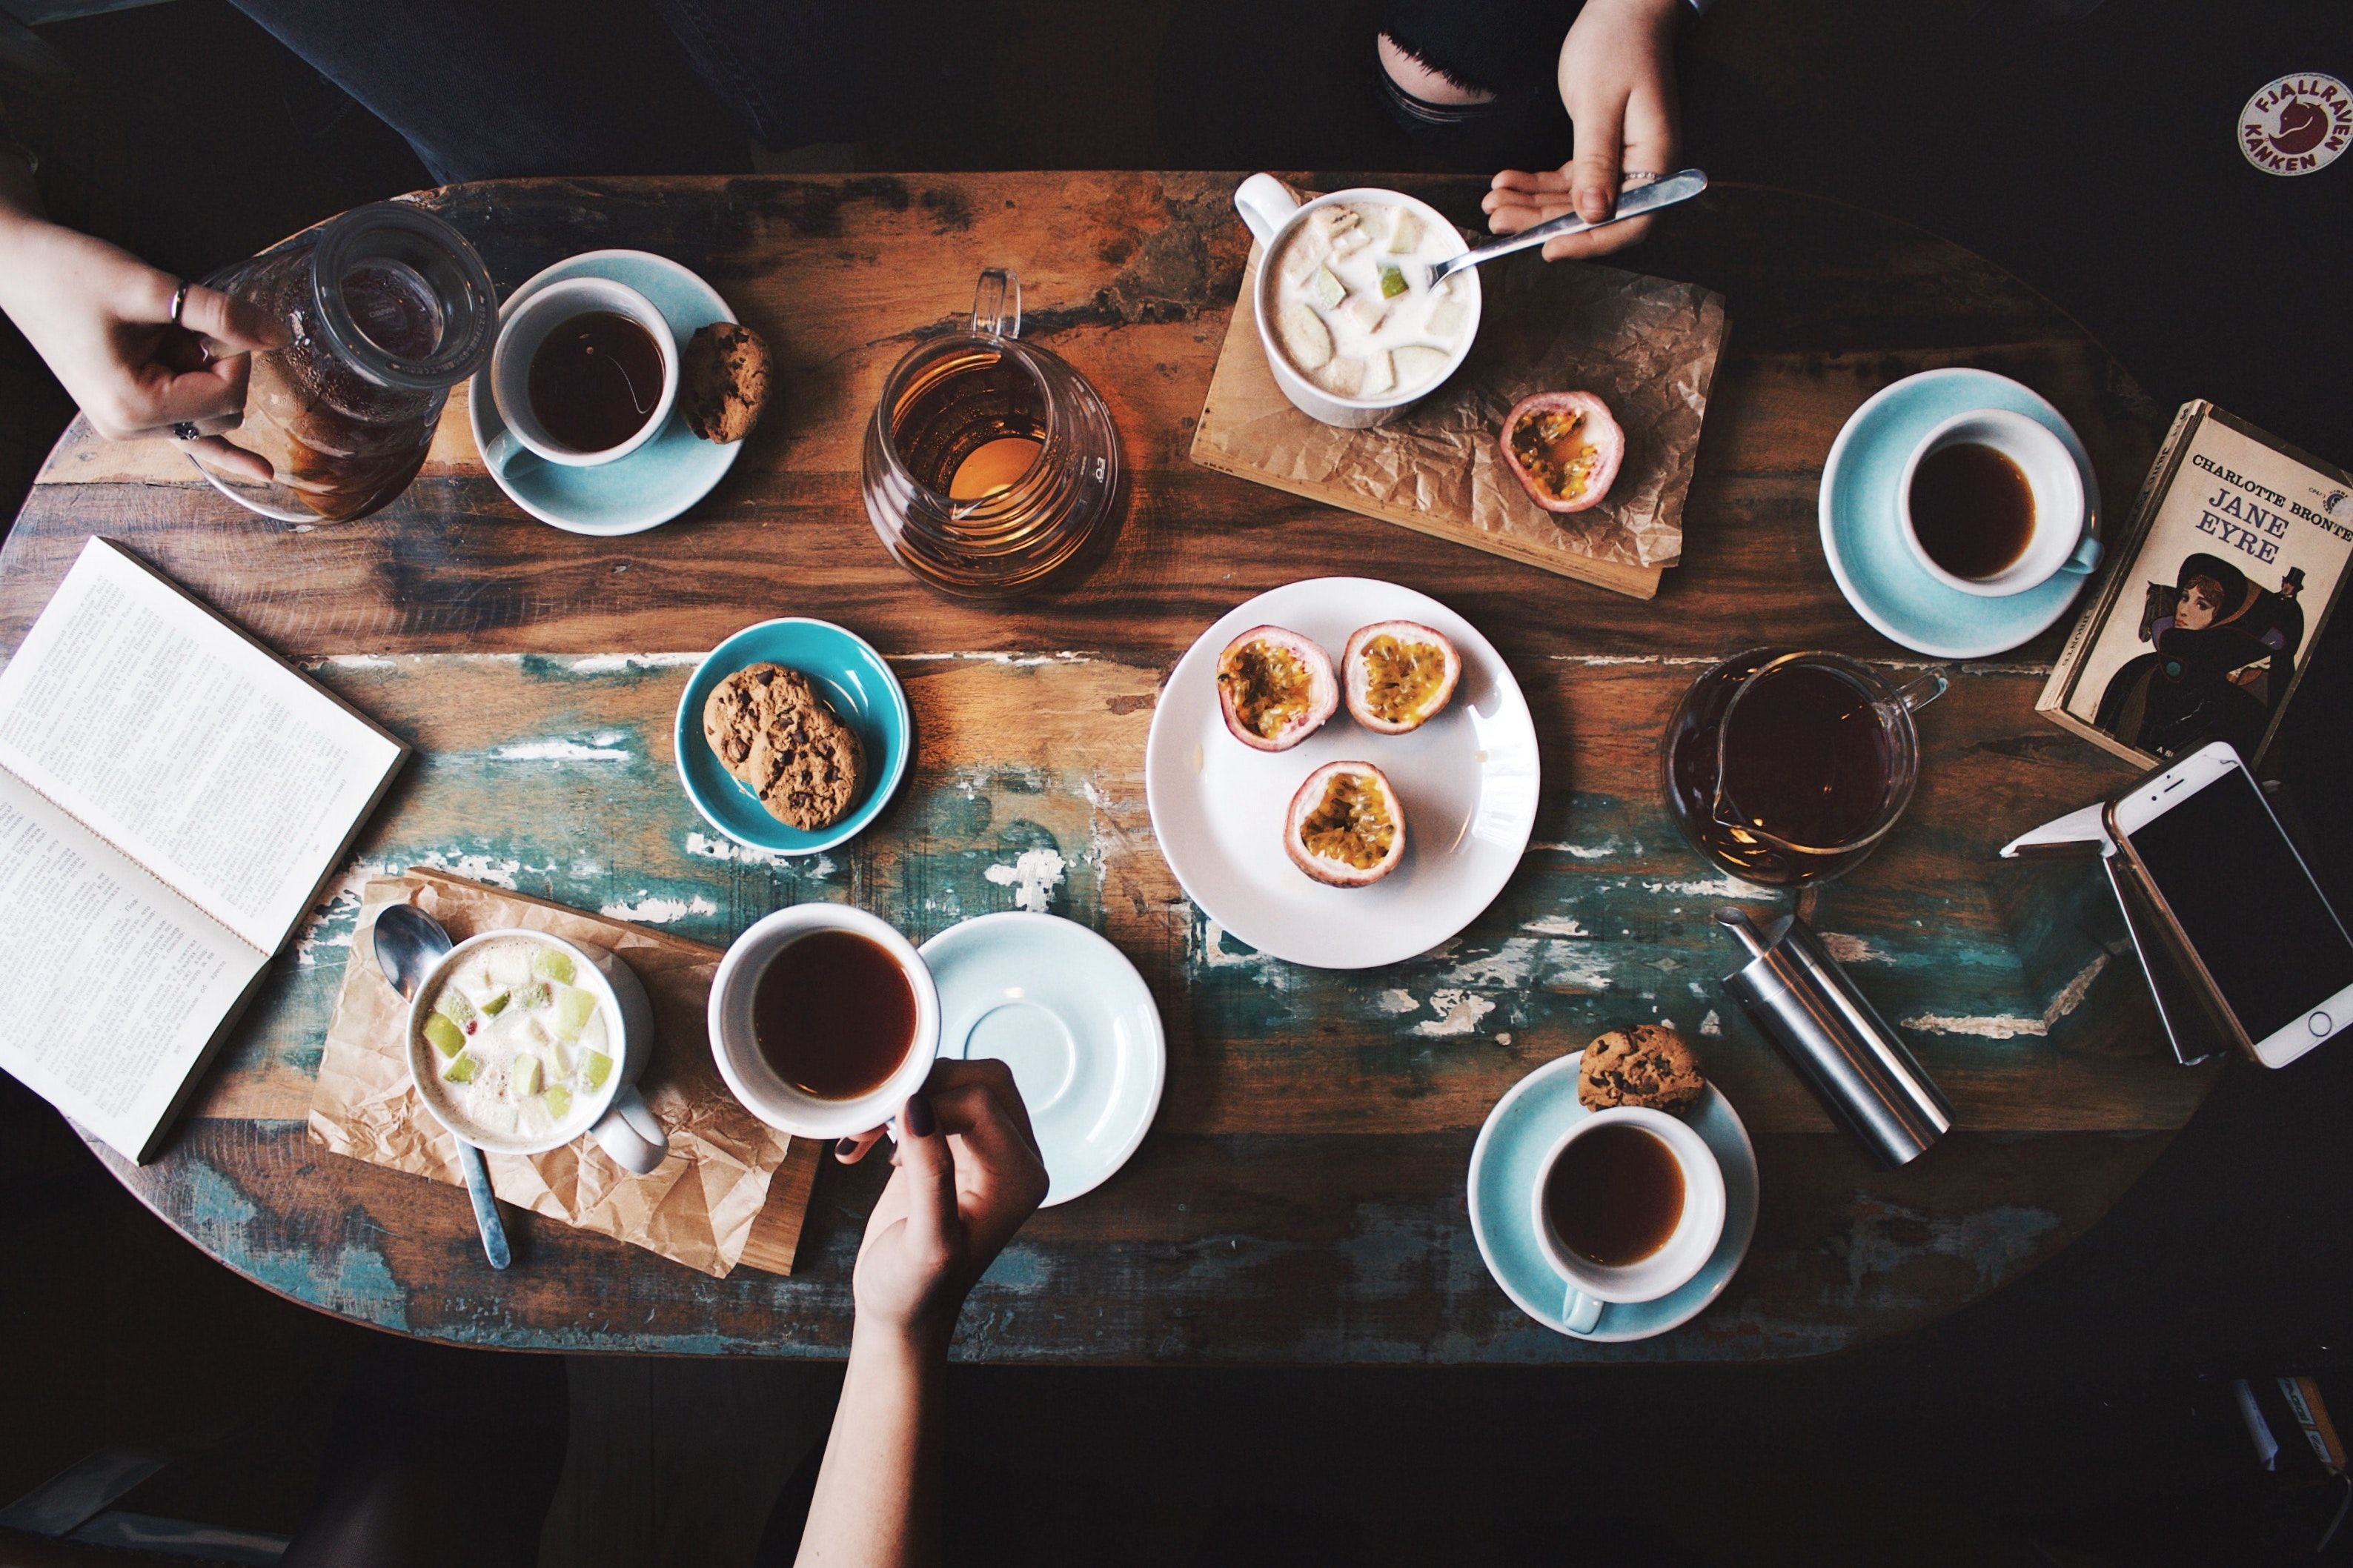 A table with plates of food and drinks - Coffee